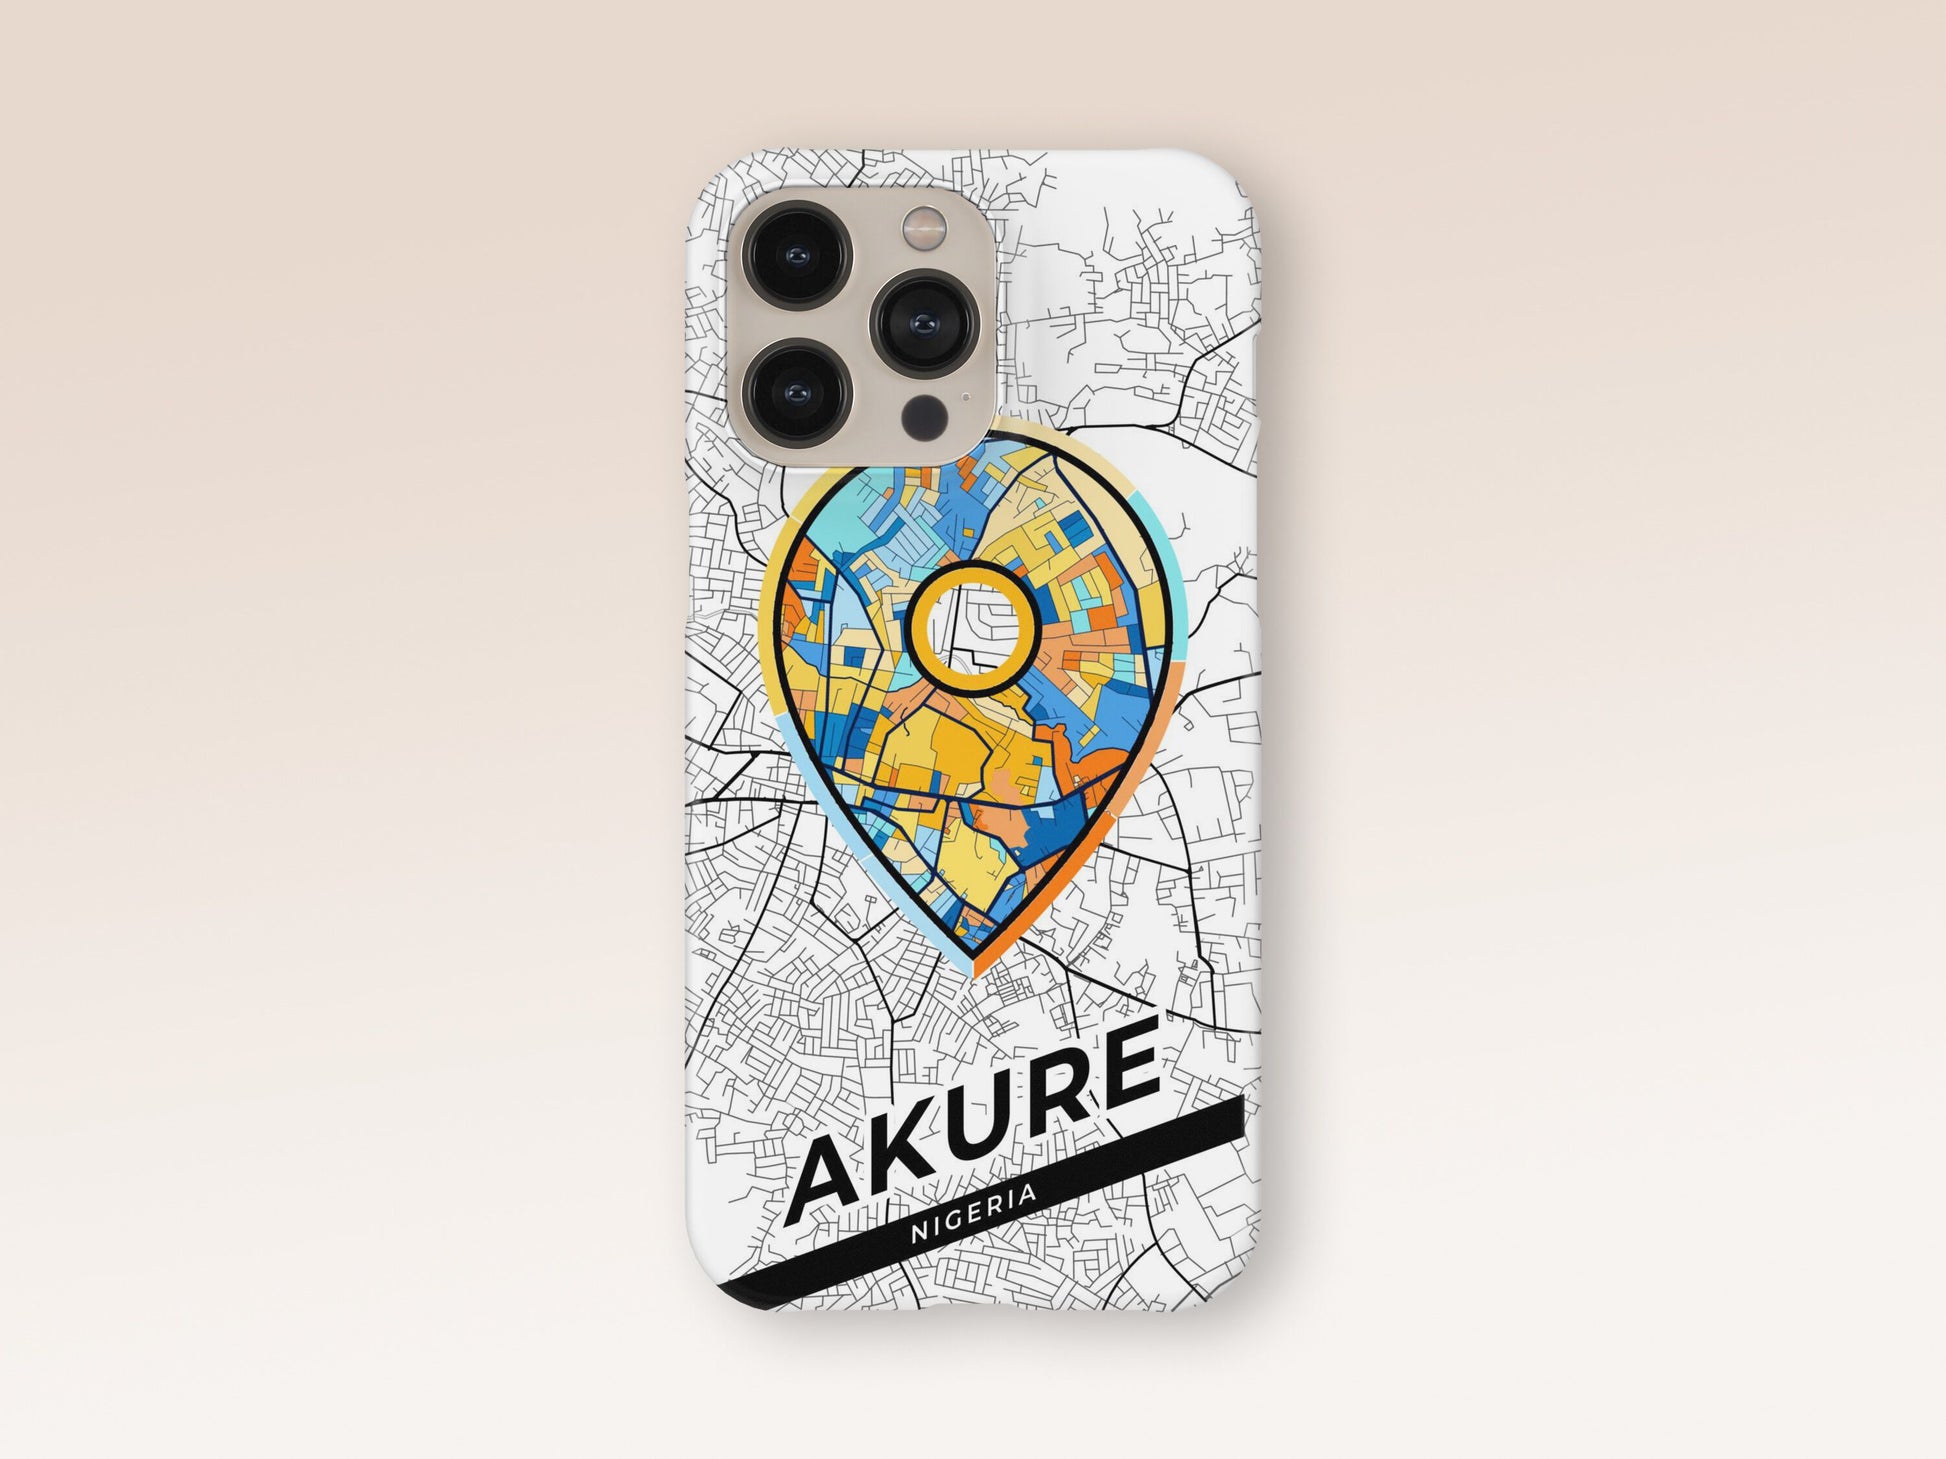 Akure Nigeria slim phone case with colorful icon. Birthday, wedding or housewarming gift. Couple match cases. 1